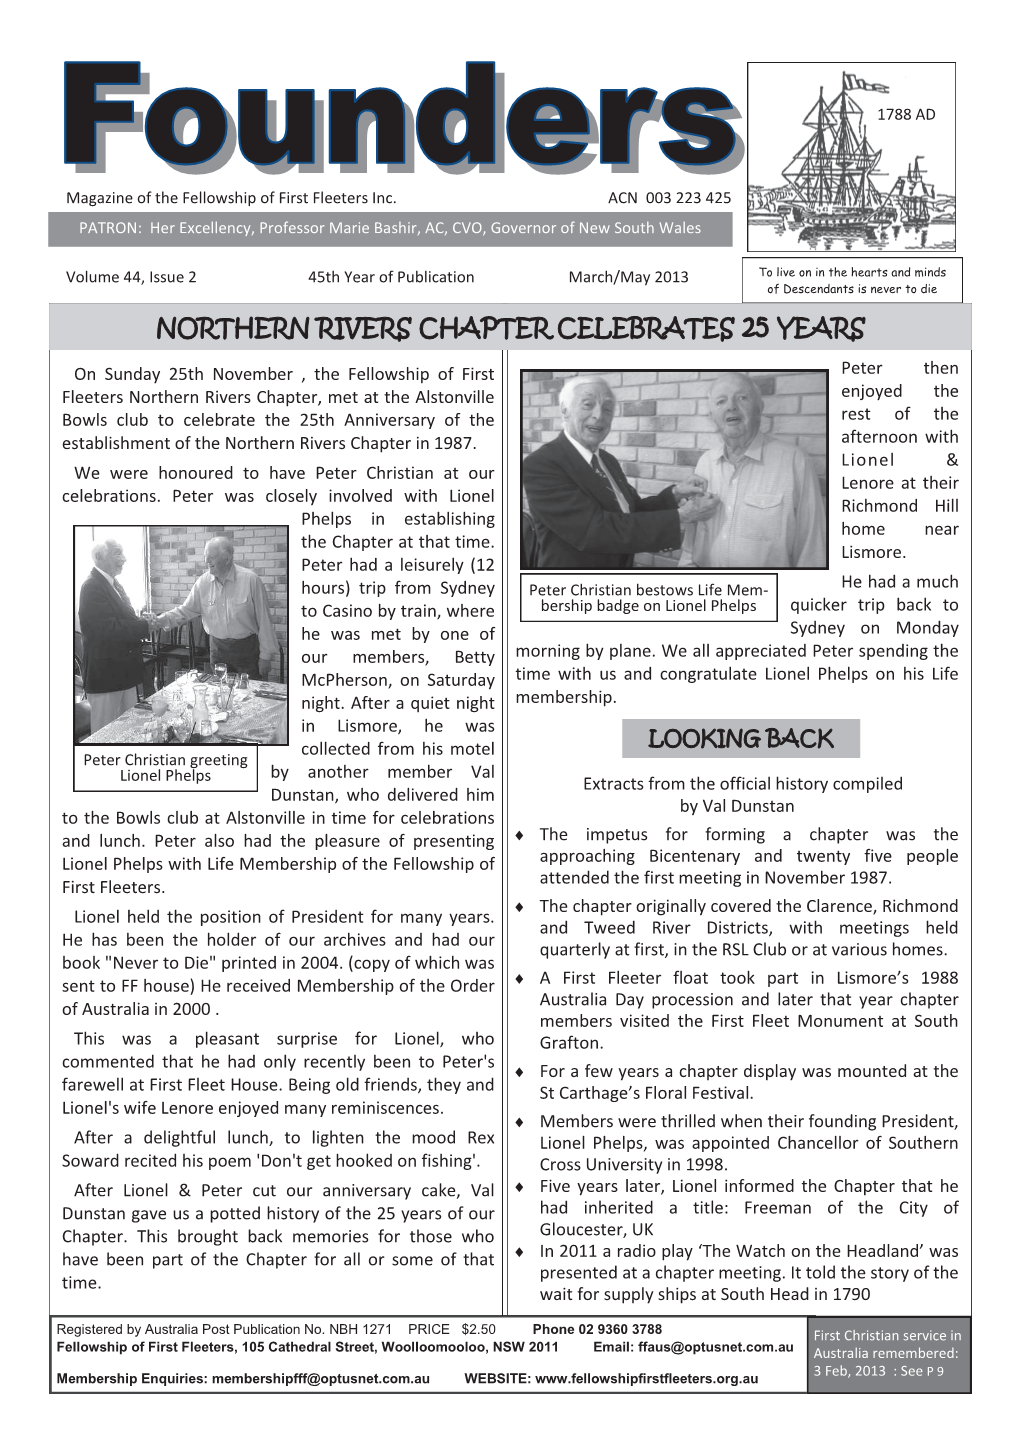 Northern Rivers Chapter Celebrates 25 Years